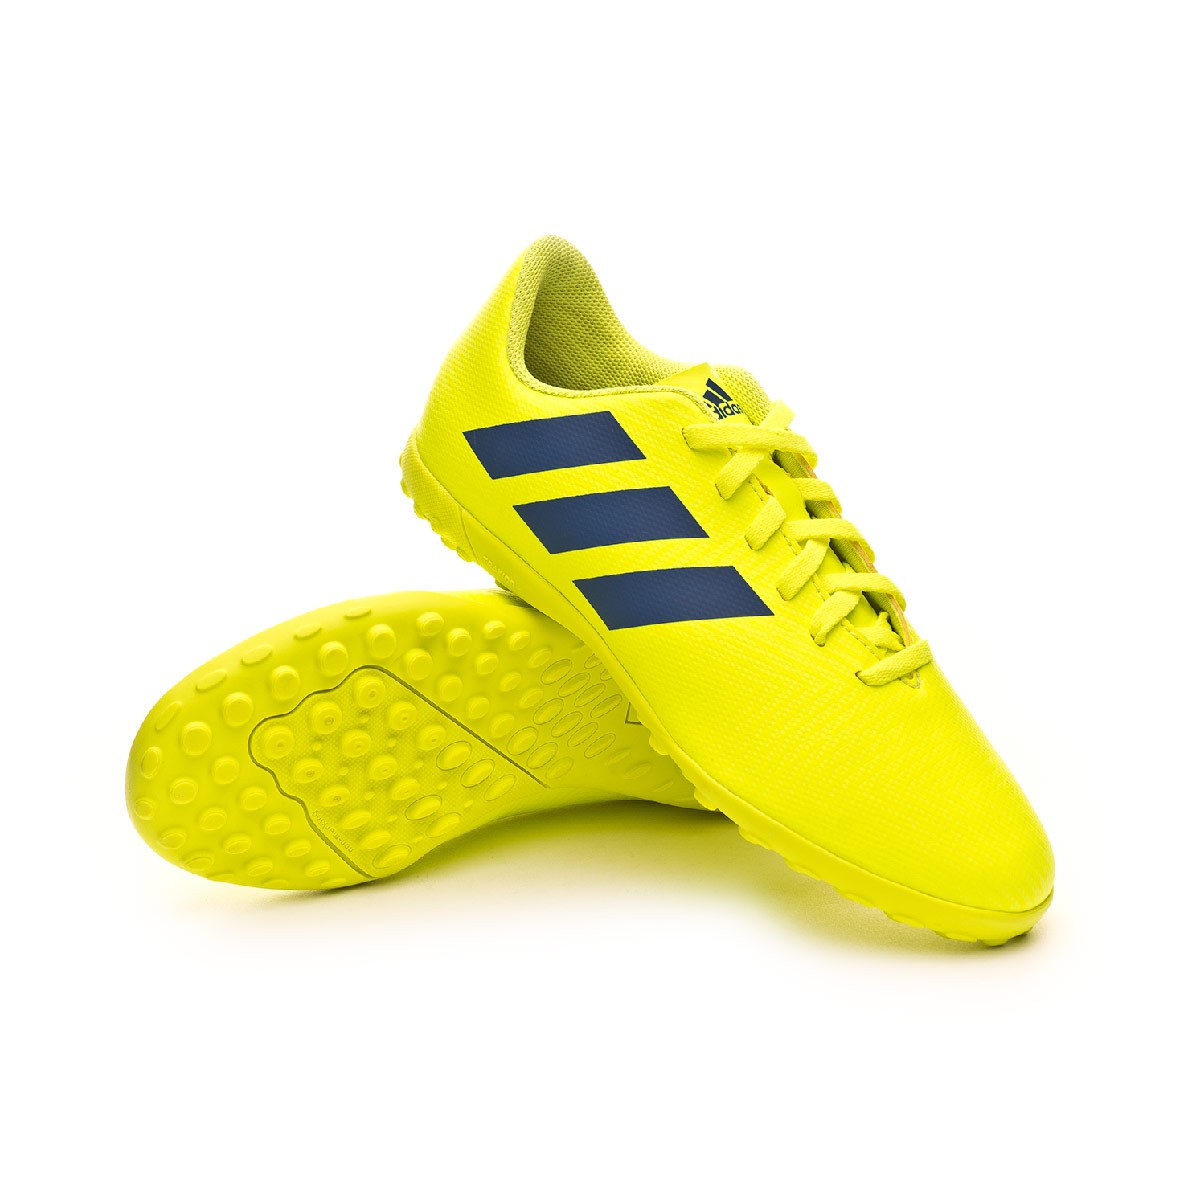 messi yellow boots